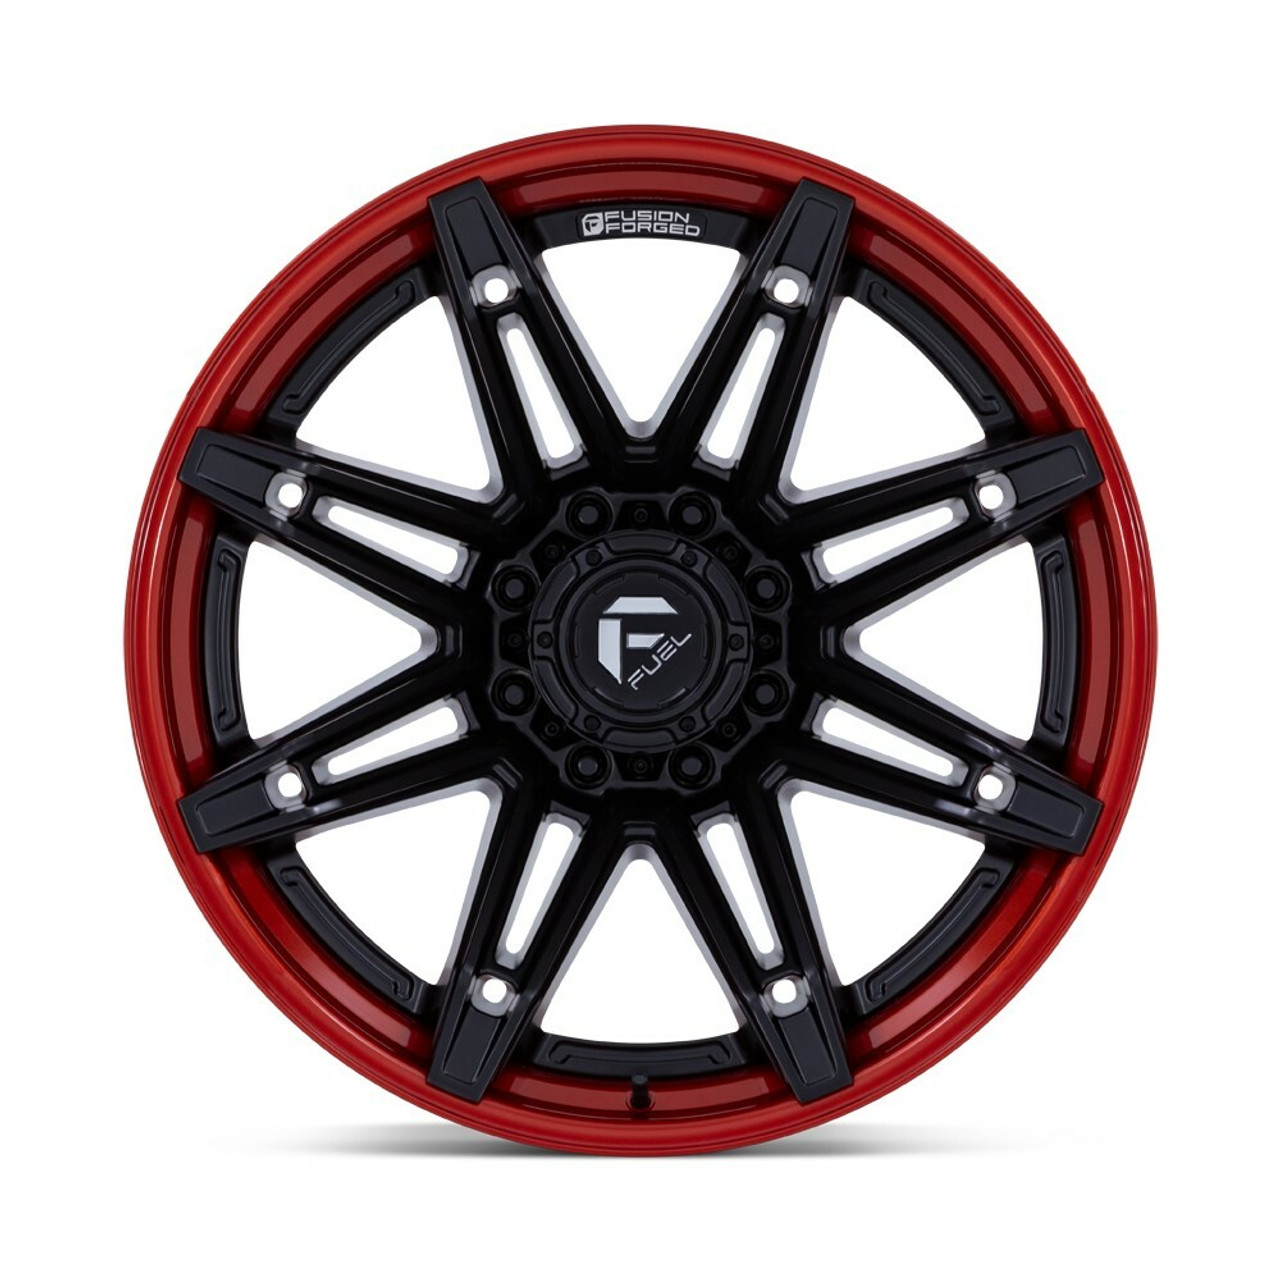 Fuel FC401 Brawl 20x10 8x170 Matte Black Candy Red Lip Wheel 20" -18mm For Ford